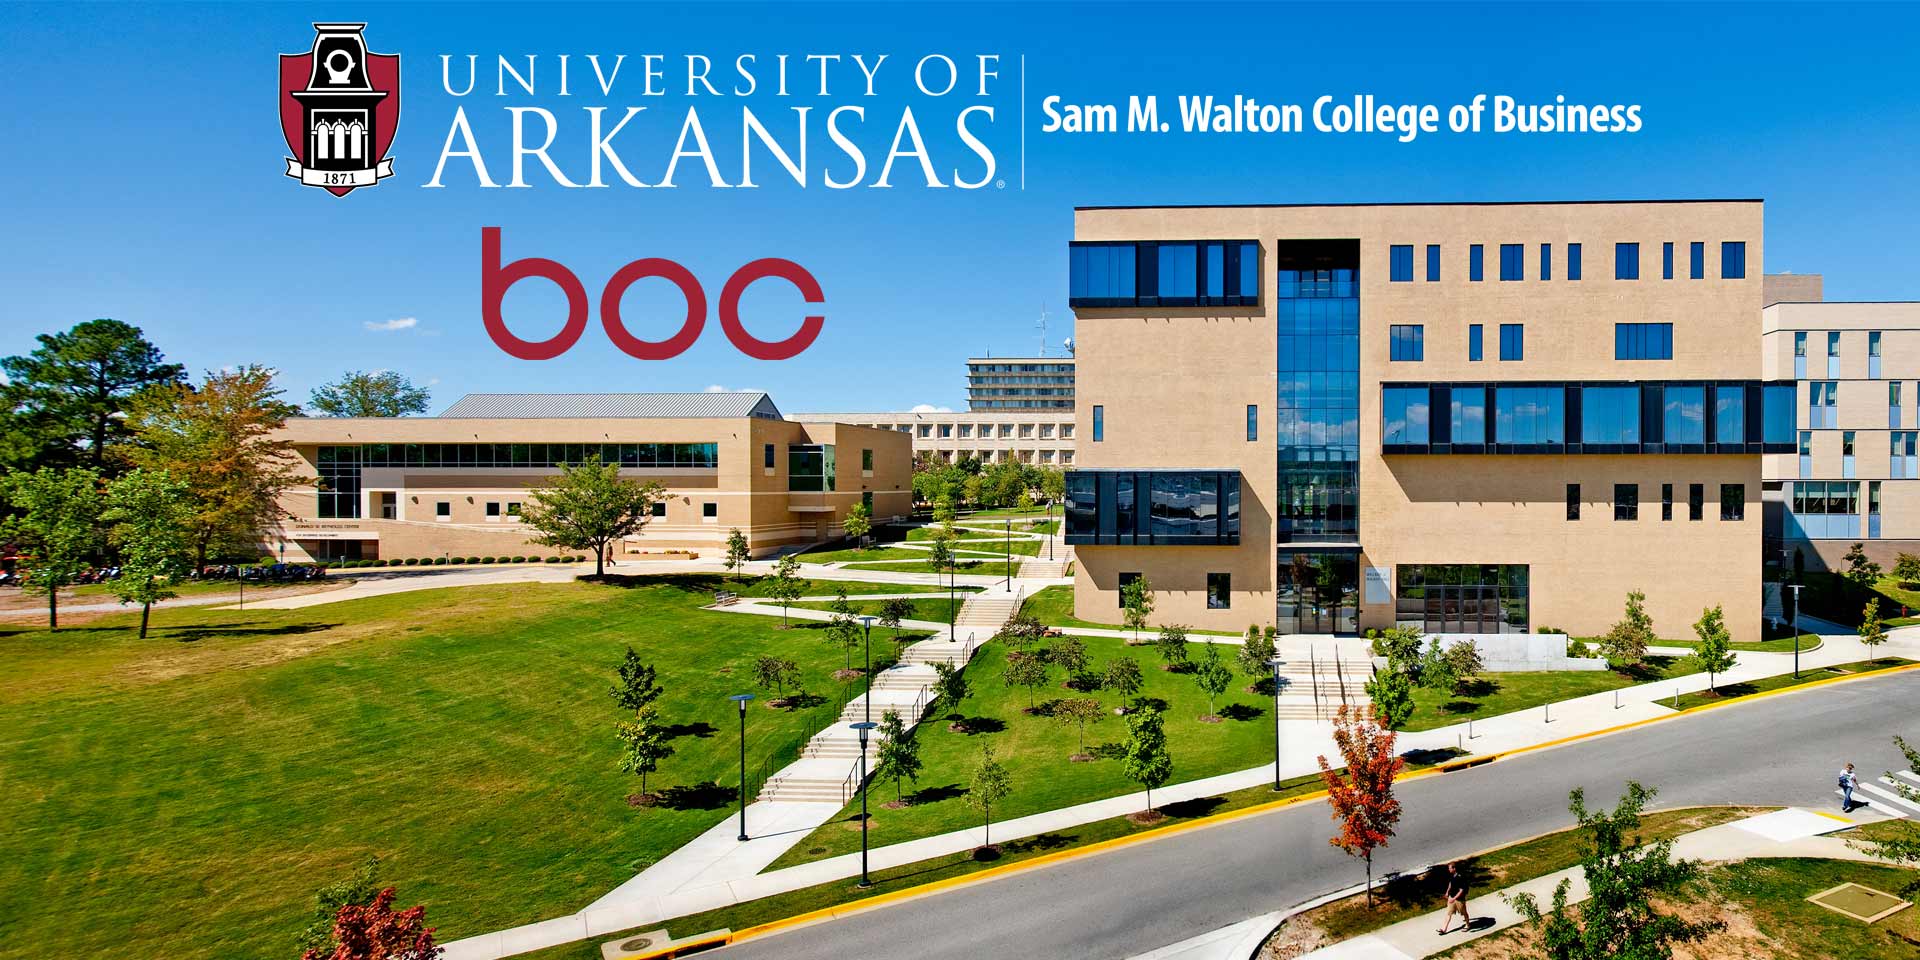 Walton Hall on the campus of the University of Arkansas, host of the Behavioral Operations Conference